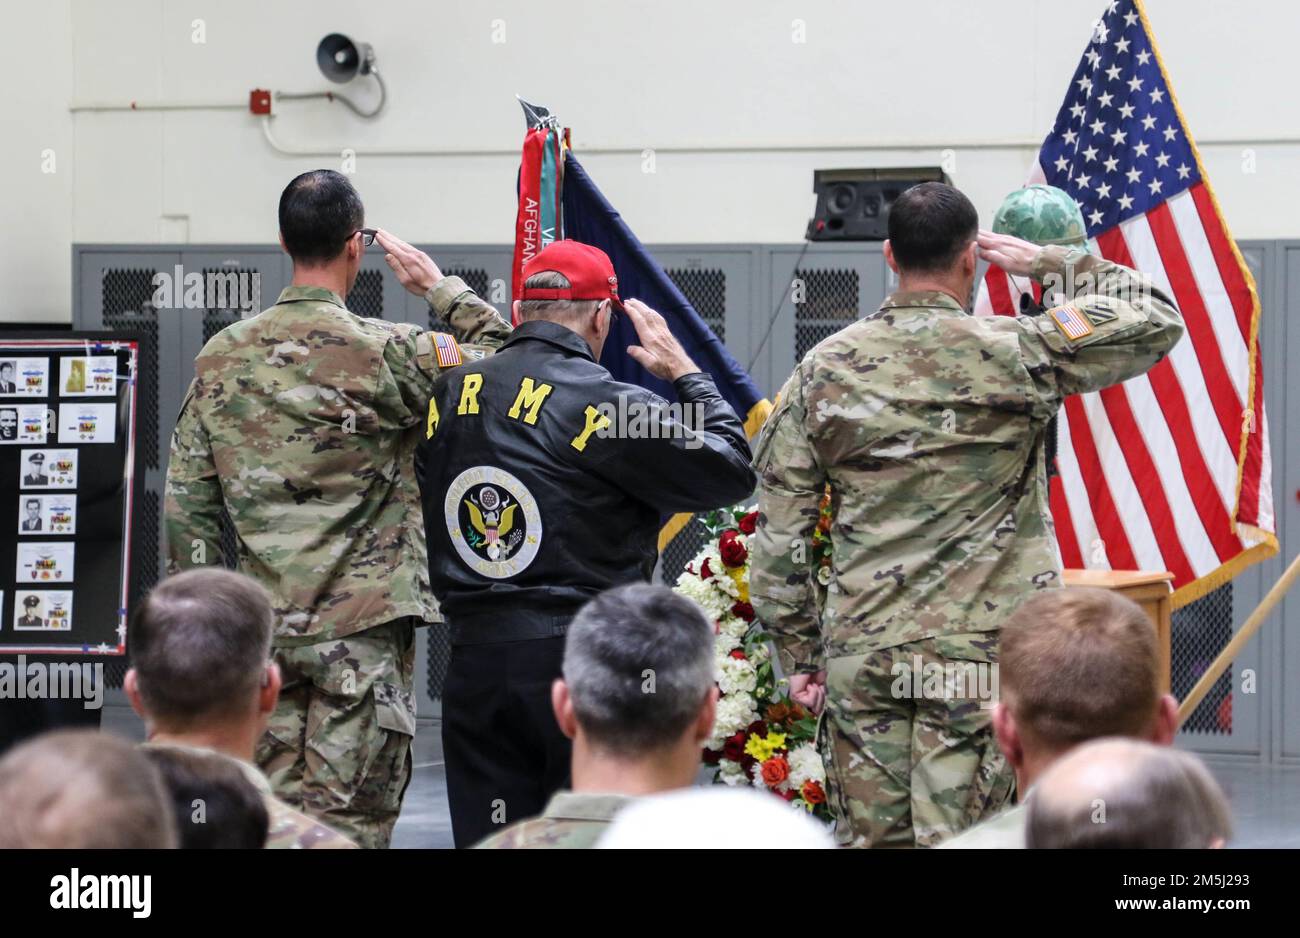 Lt. Col. Adam Ropelewski, left, commander of 2nd Battalion, 77th Field Artillery Regiment, 2nd Stryker Brigade, 4th Infantry Division, Mr. Paige Lanier, middle, and Lt. Col. Thomas Carroll, right, commander of 2nd Battalion, 12th Infantry Regiment, render honors at a memorial ceremony on Fort Carson, Colo., Mar. 18, 2022.  The ceremony memorialized the 36 lives lost from 2nd Bn., 77th Field Artillery Reg. and 2nd Battalion, 12th Infantry Regiment during the Battle of Suoi Tre in Vietnam, Mar. 21, 1967. U.S. Army photo by Maj. Jason Elmore. Stock Photo